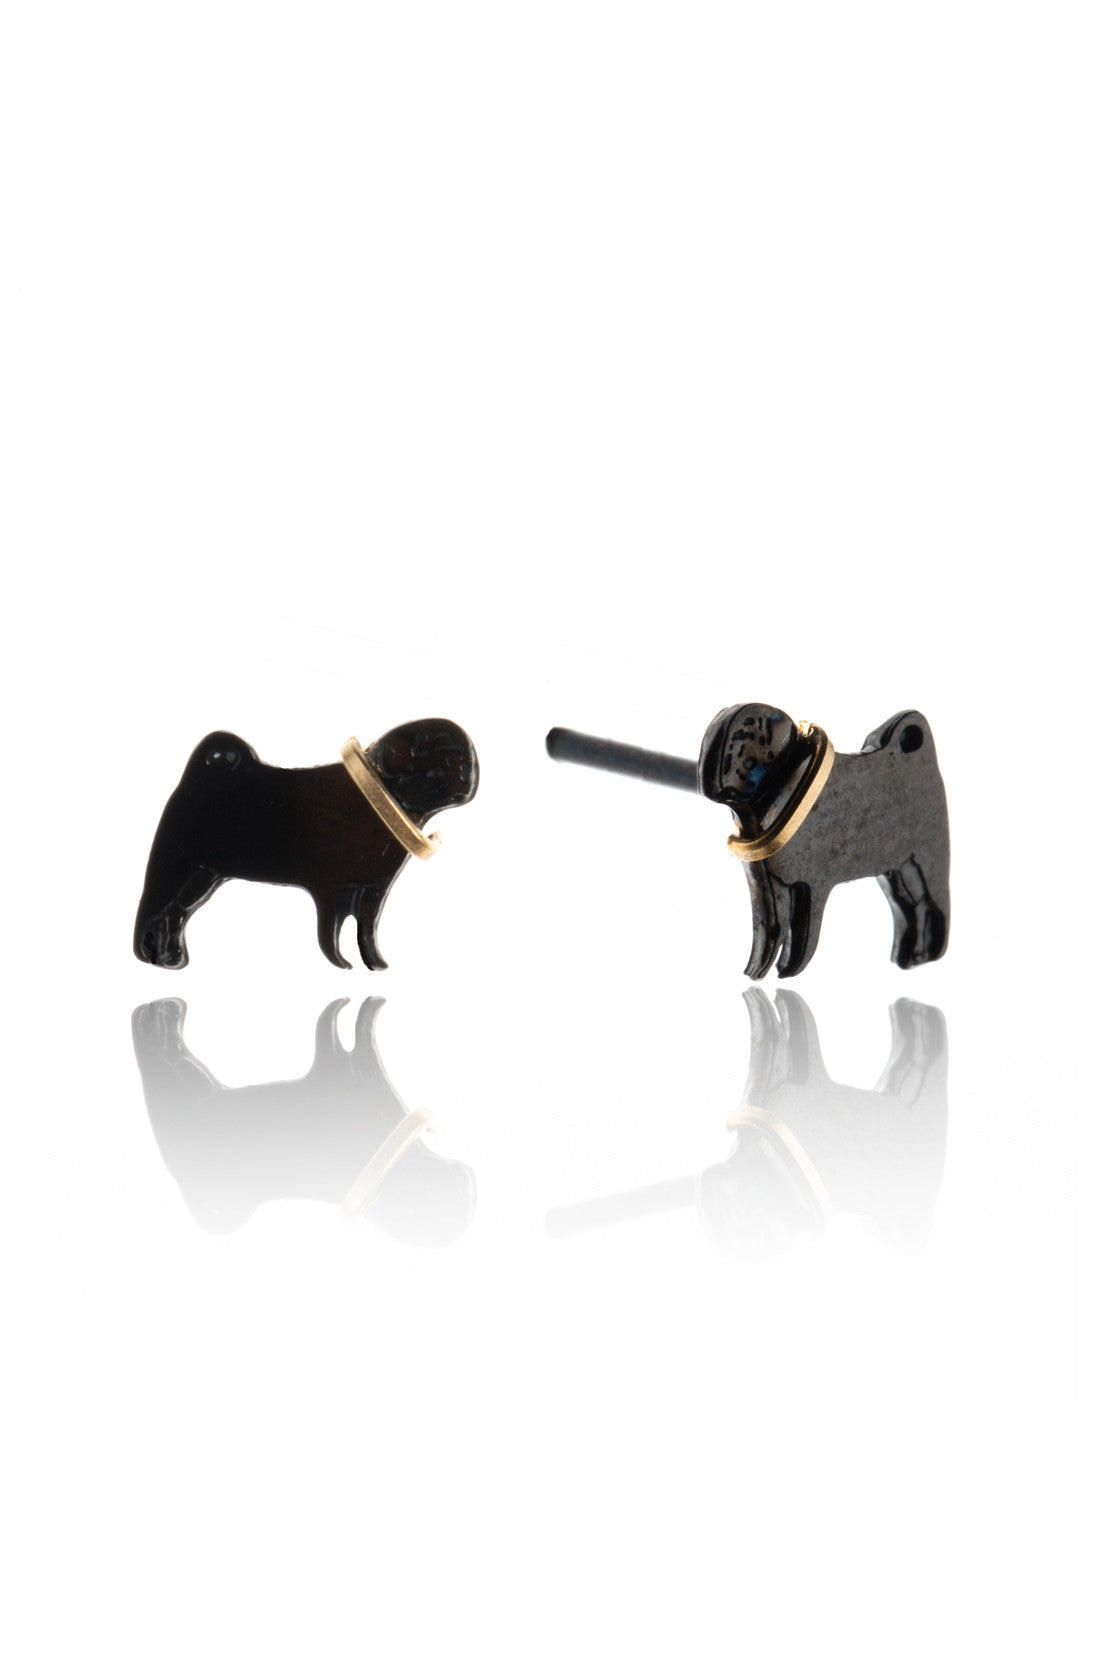 Tiny pug stud earrings in black, with a contrasting gold collar.